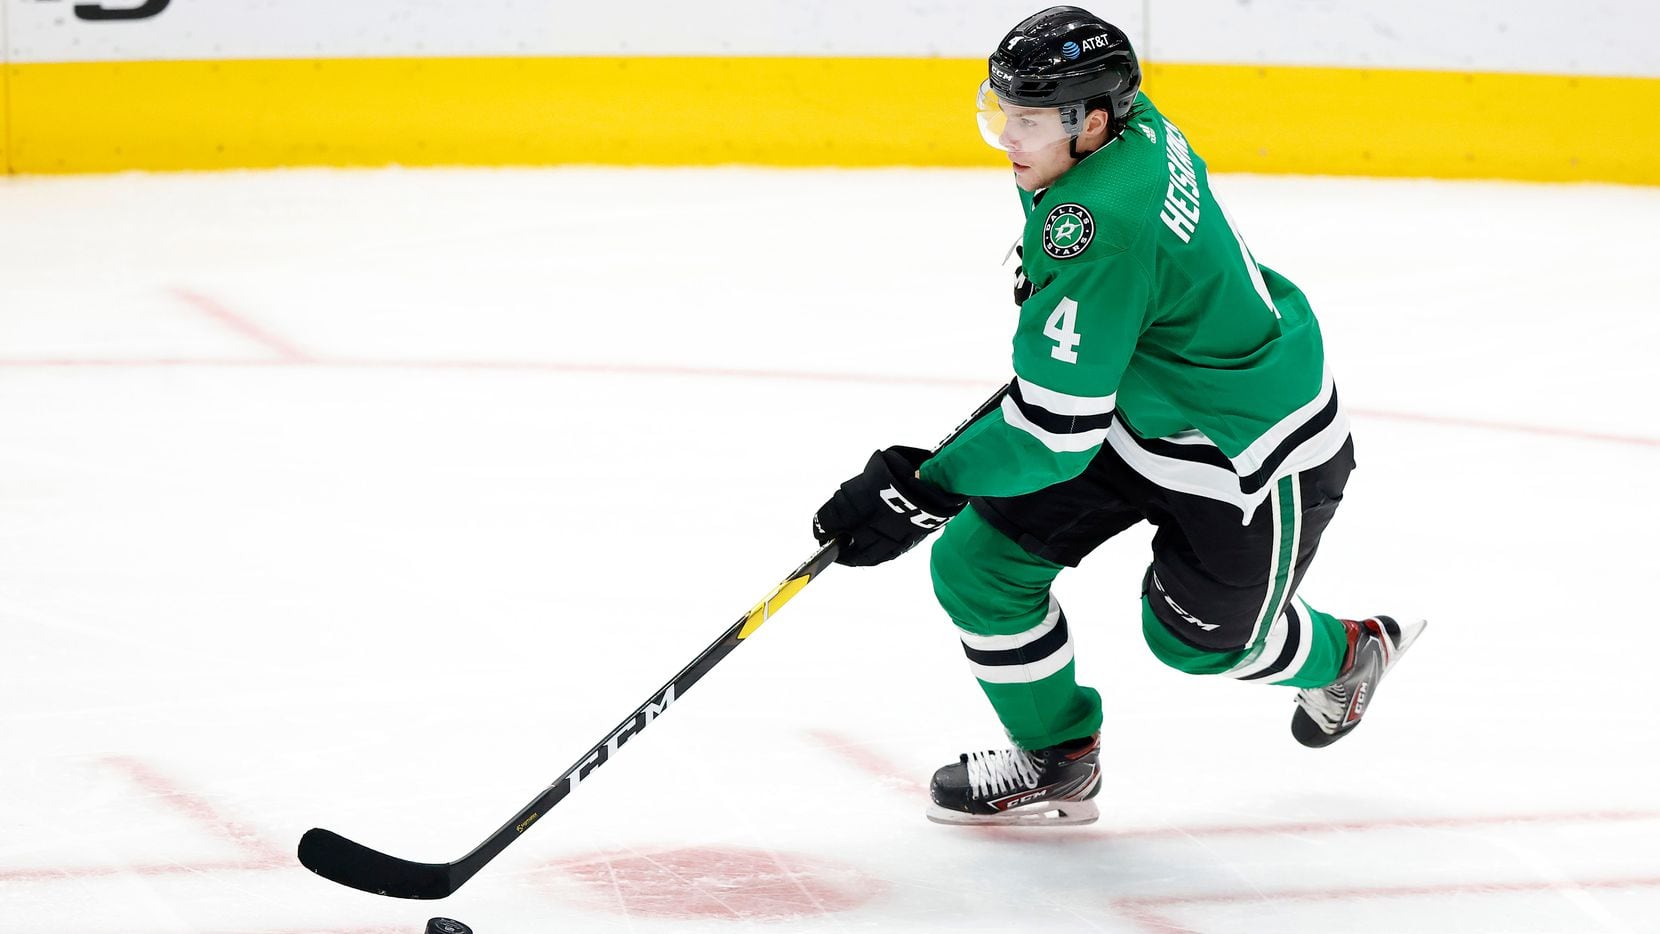 Fresh off contract extension, Miro Heiskanen enters Stars camp with high expectations